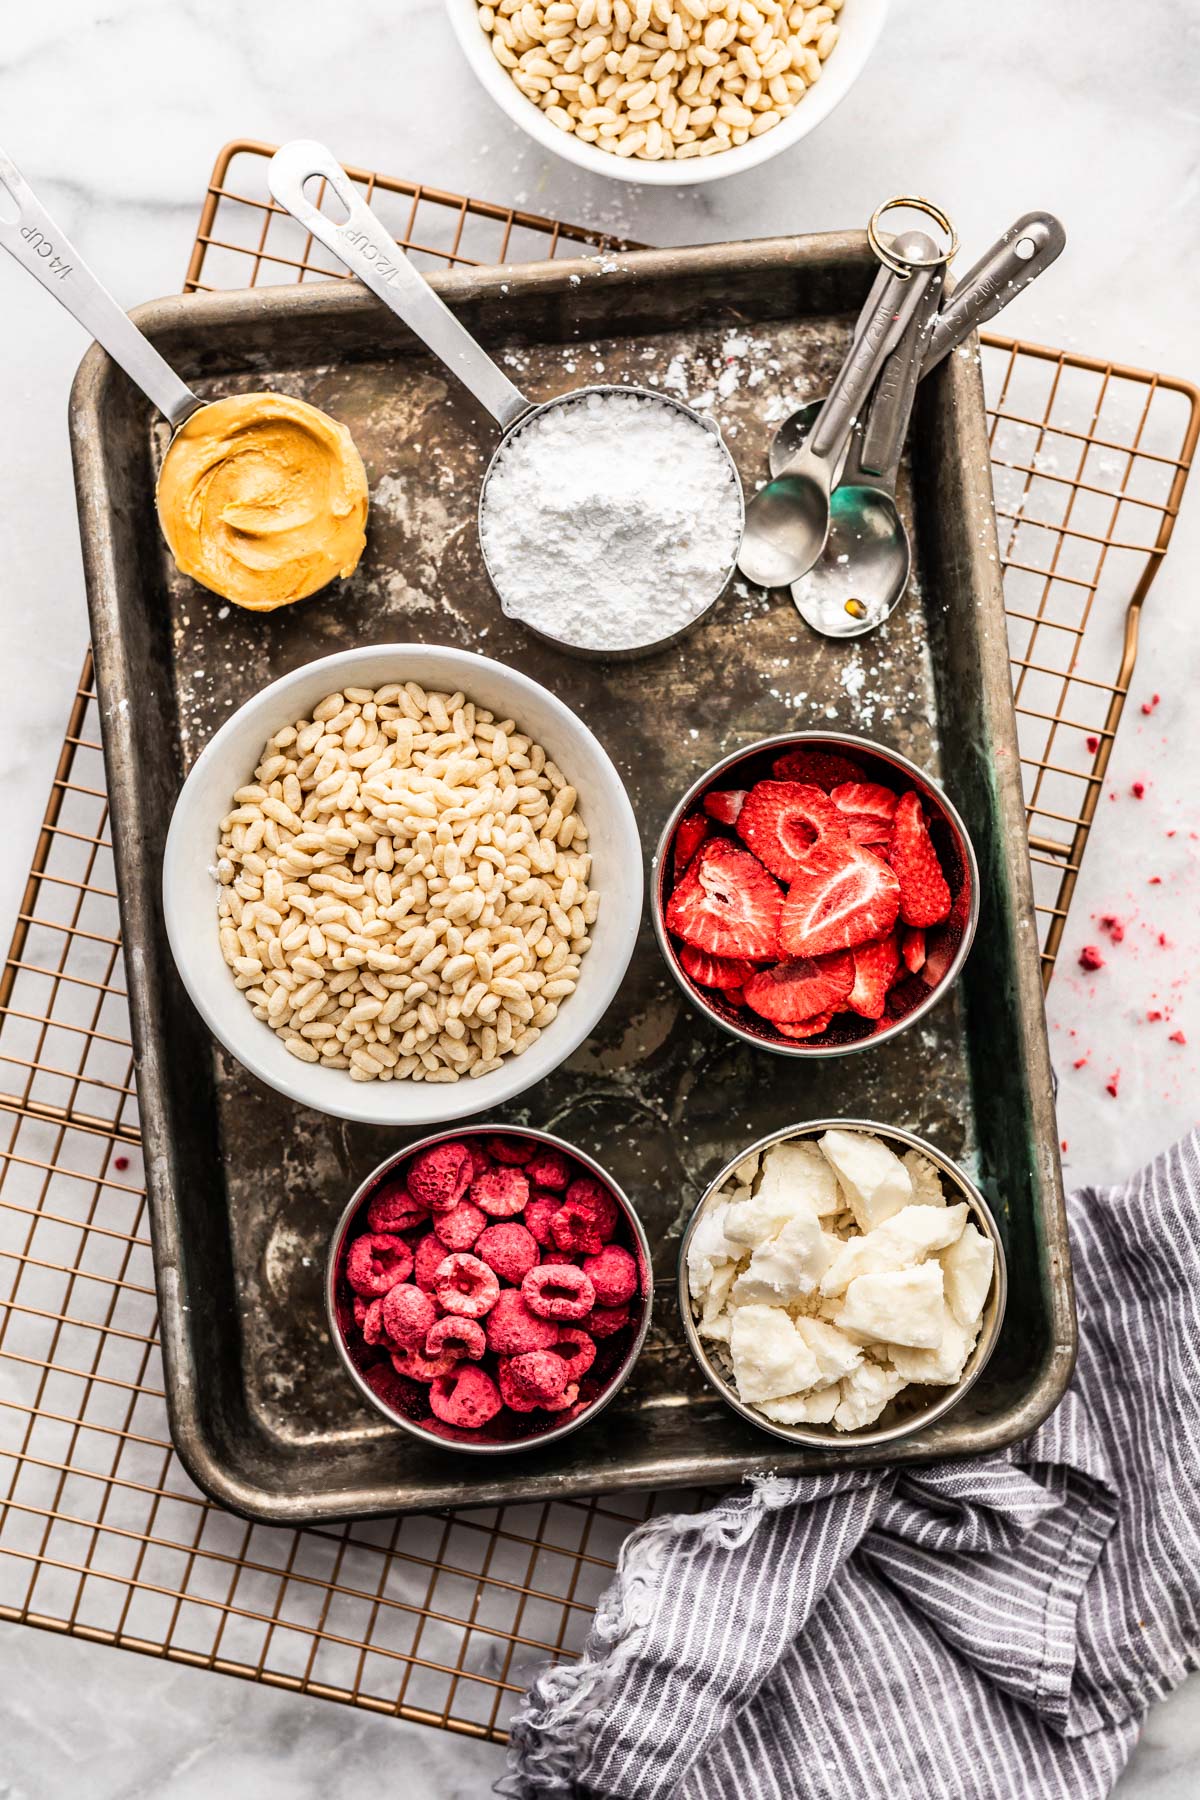 ingredients for white chocolate rice crispy bars with raspberries.